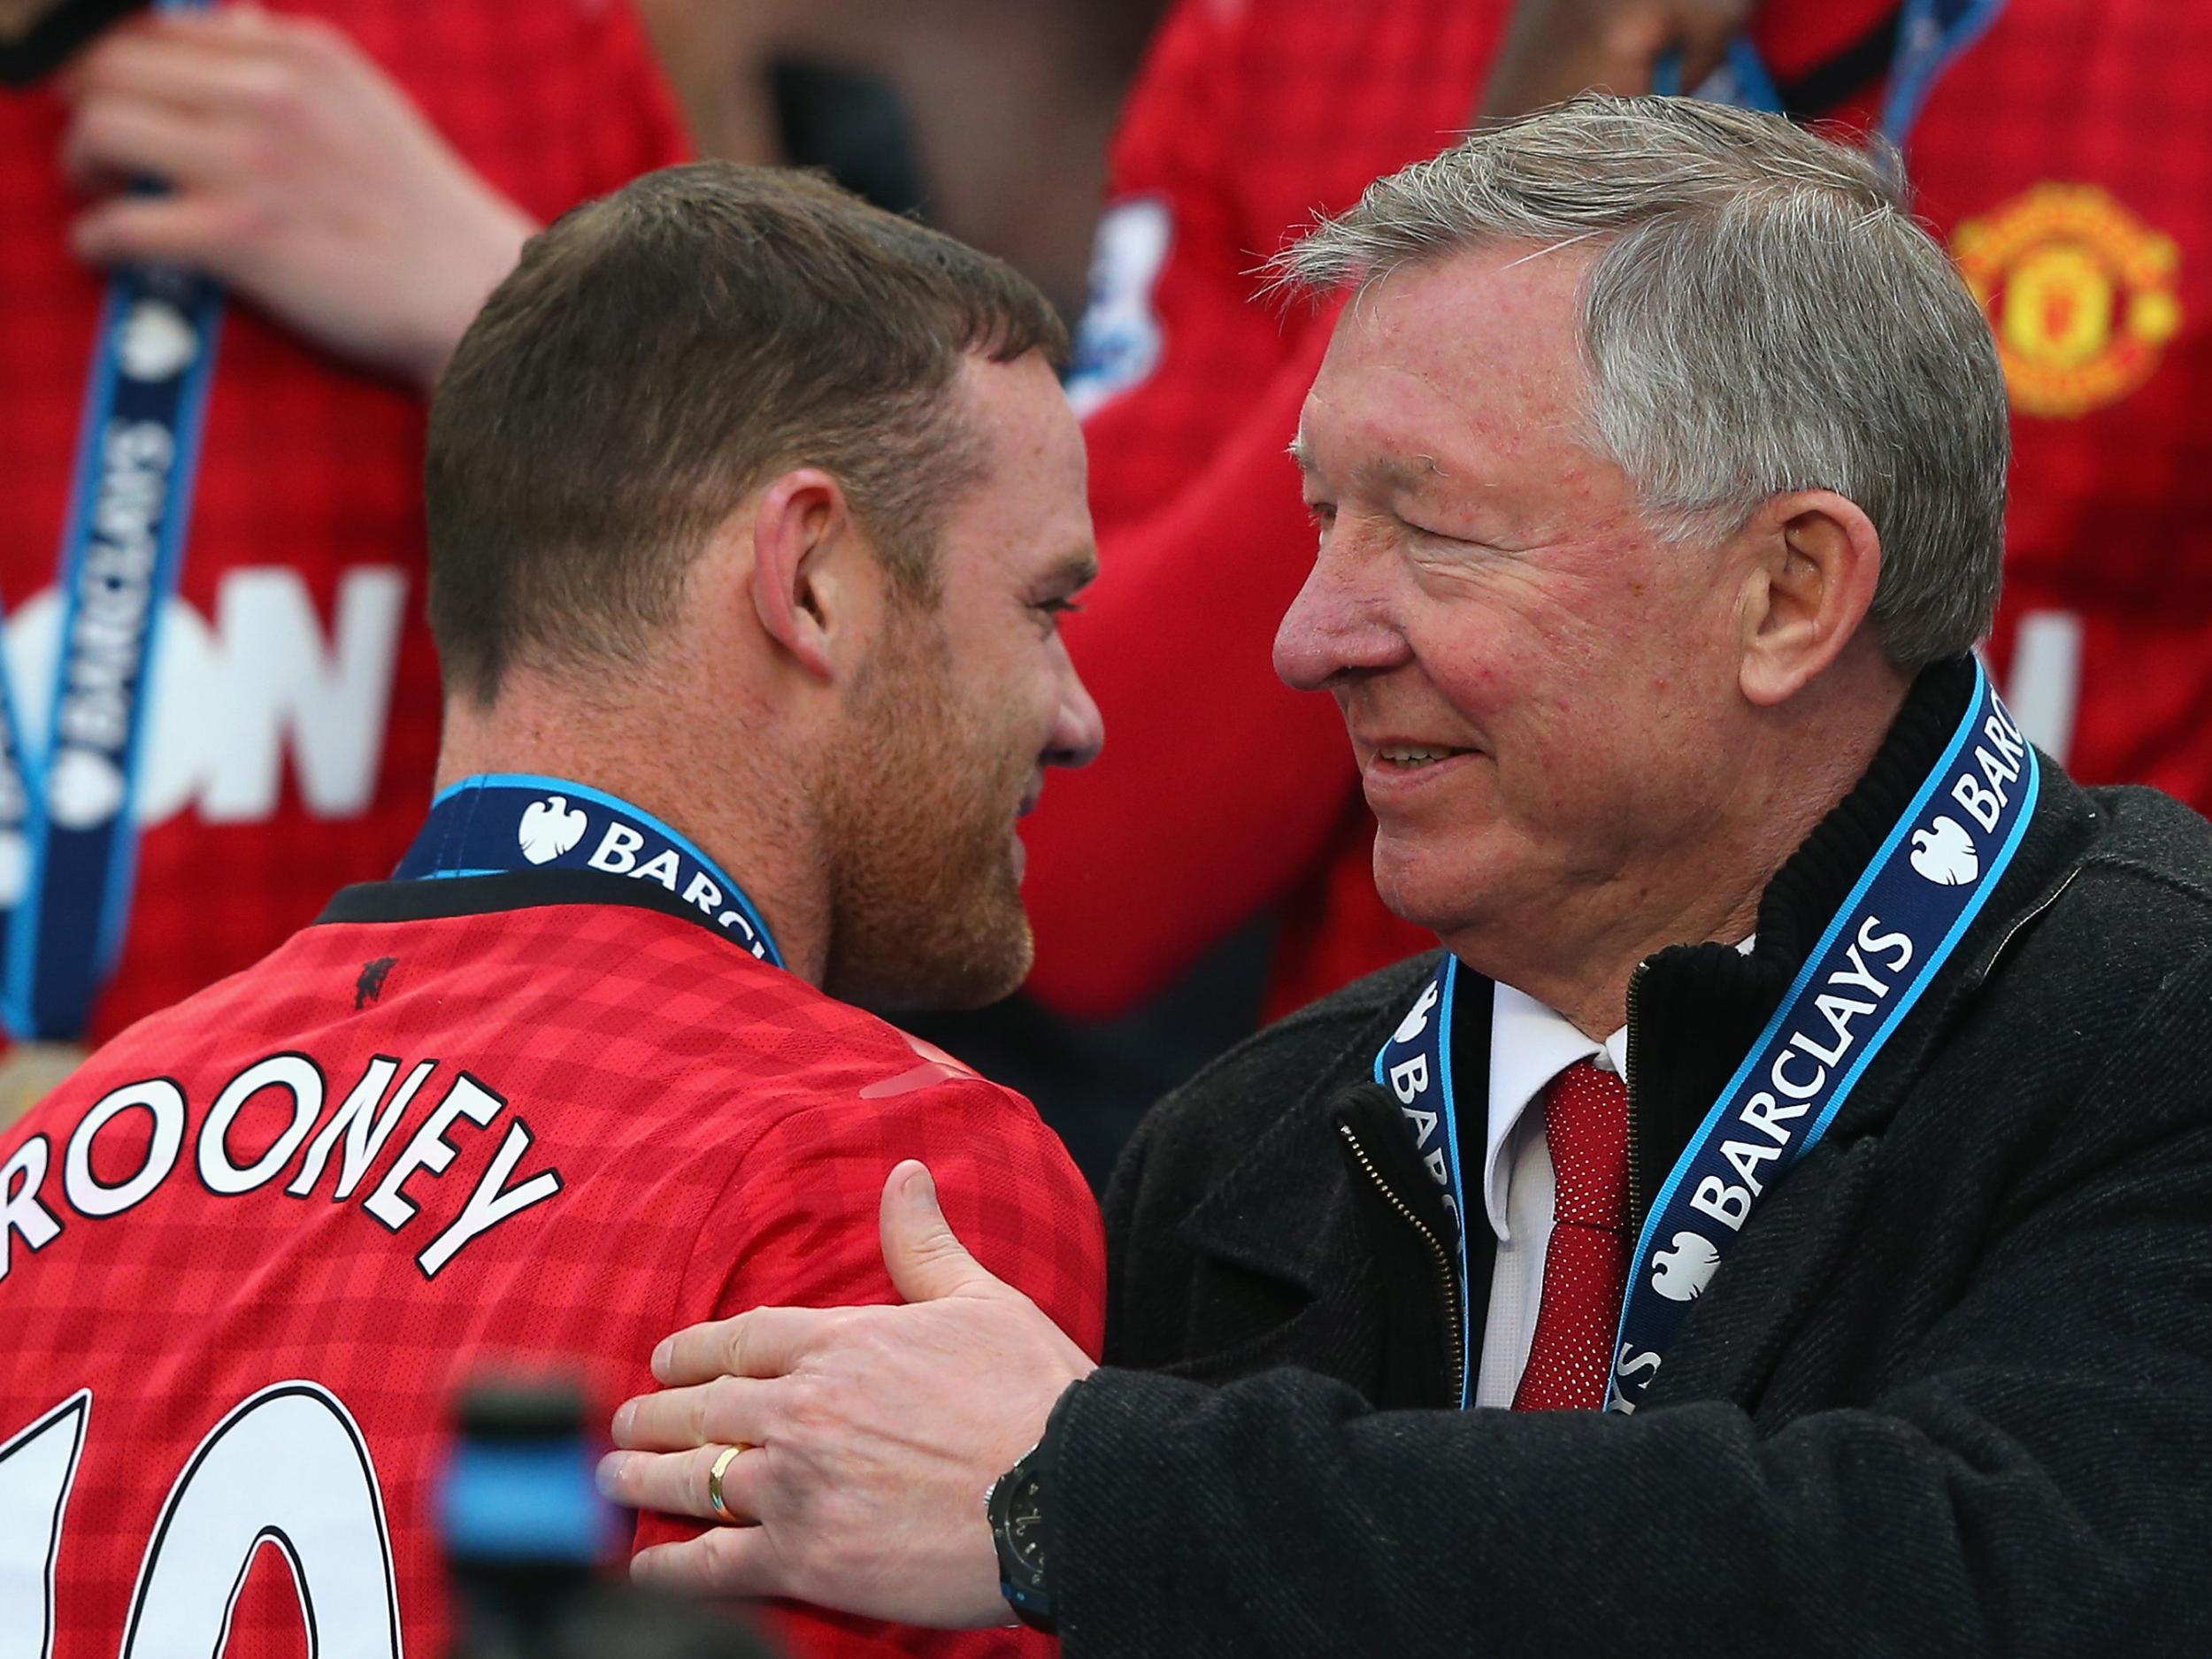 Rooney and Ferguson clashed a lot throughout their time at Manchester United together